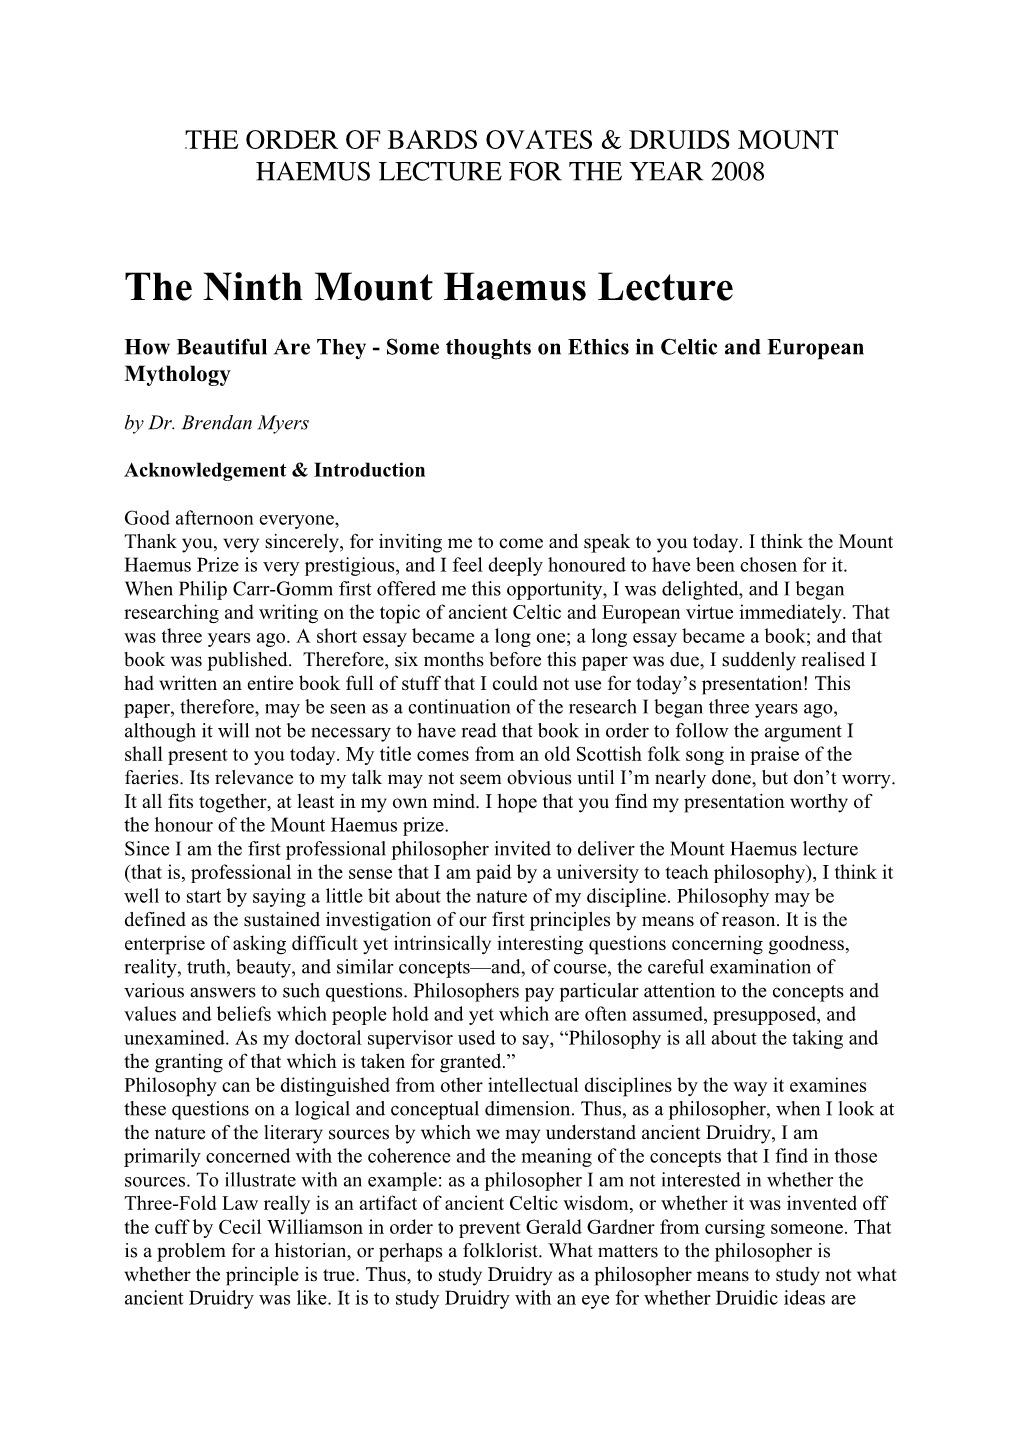 The Ninth Mount Haemus Lecture